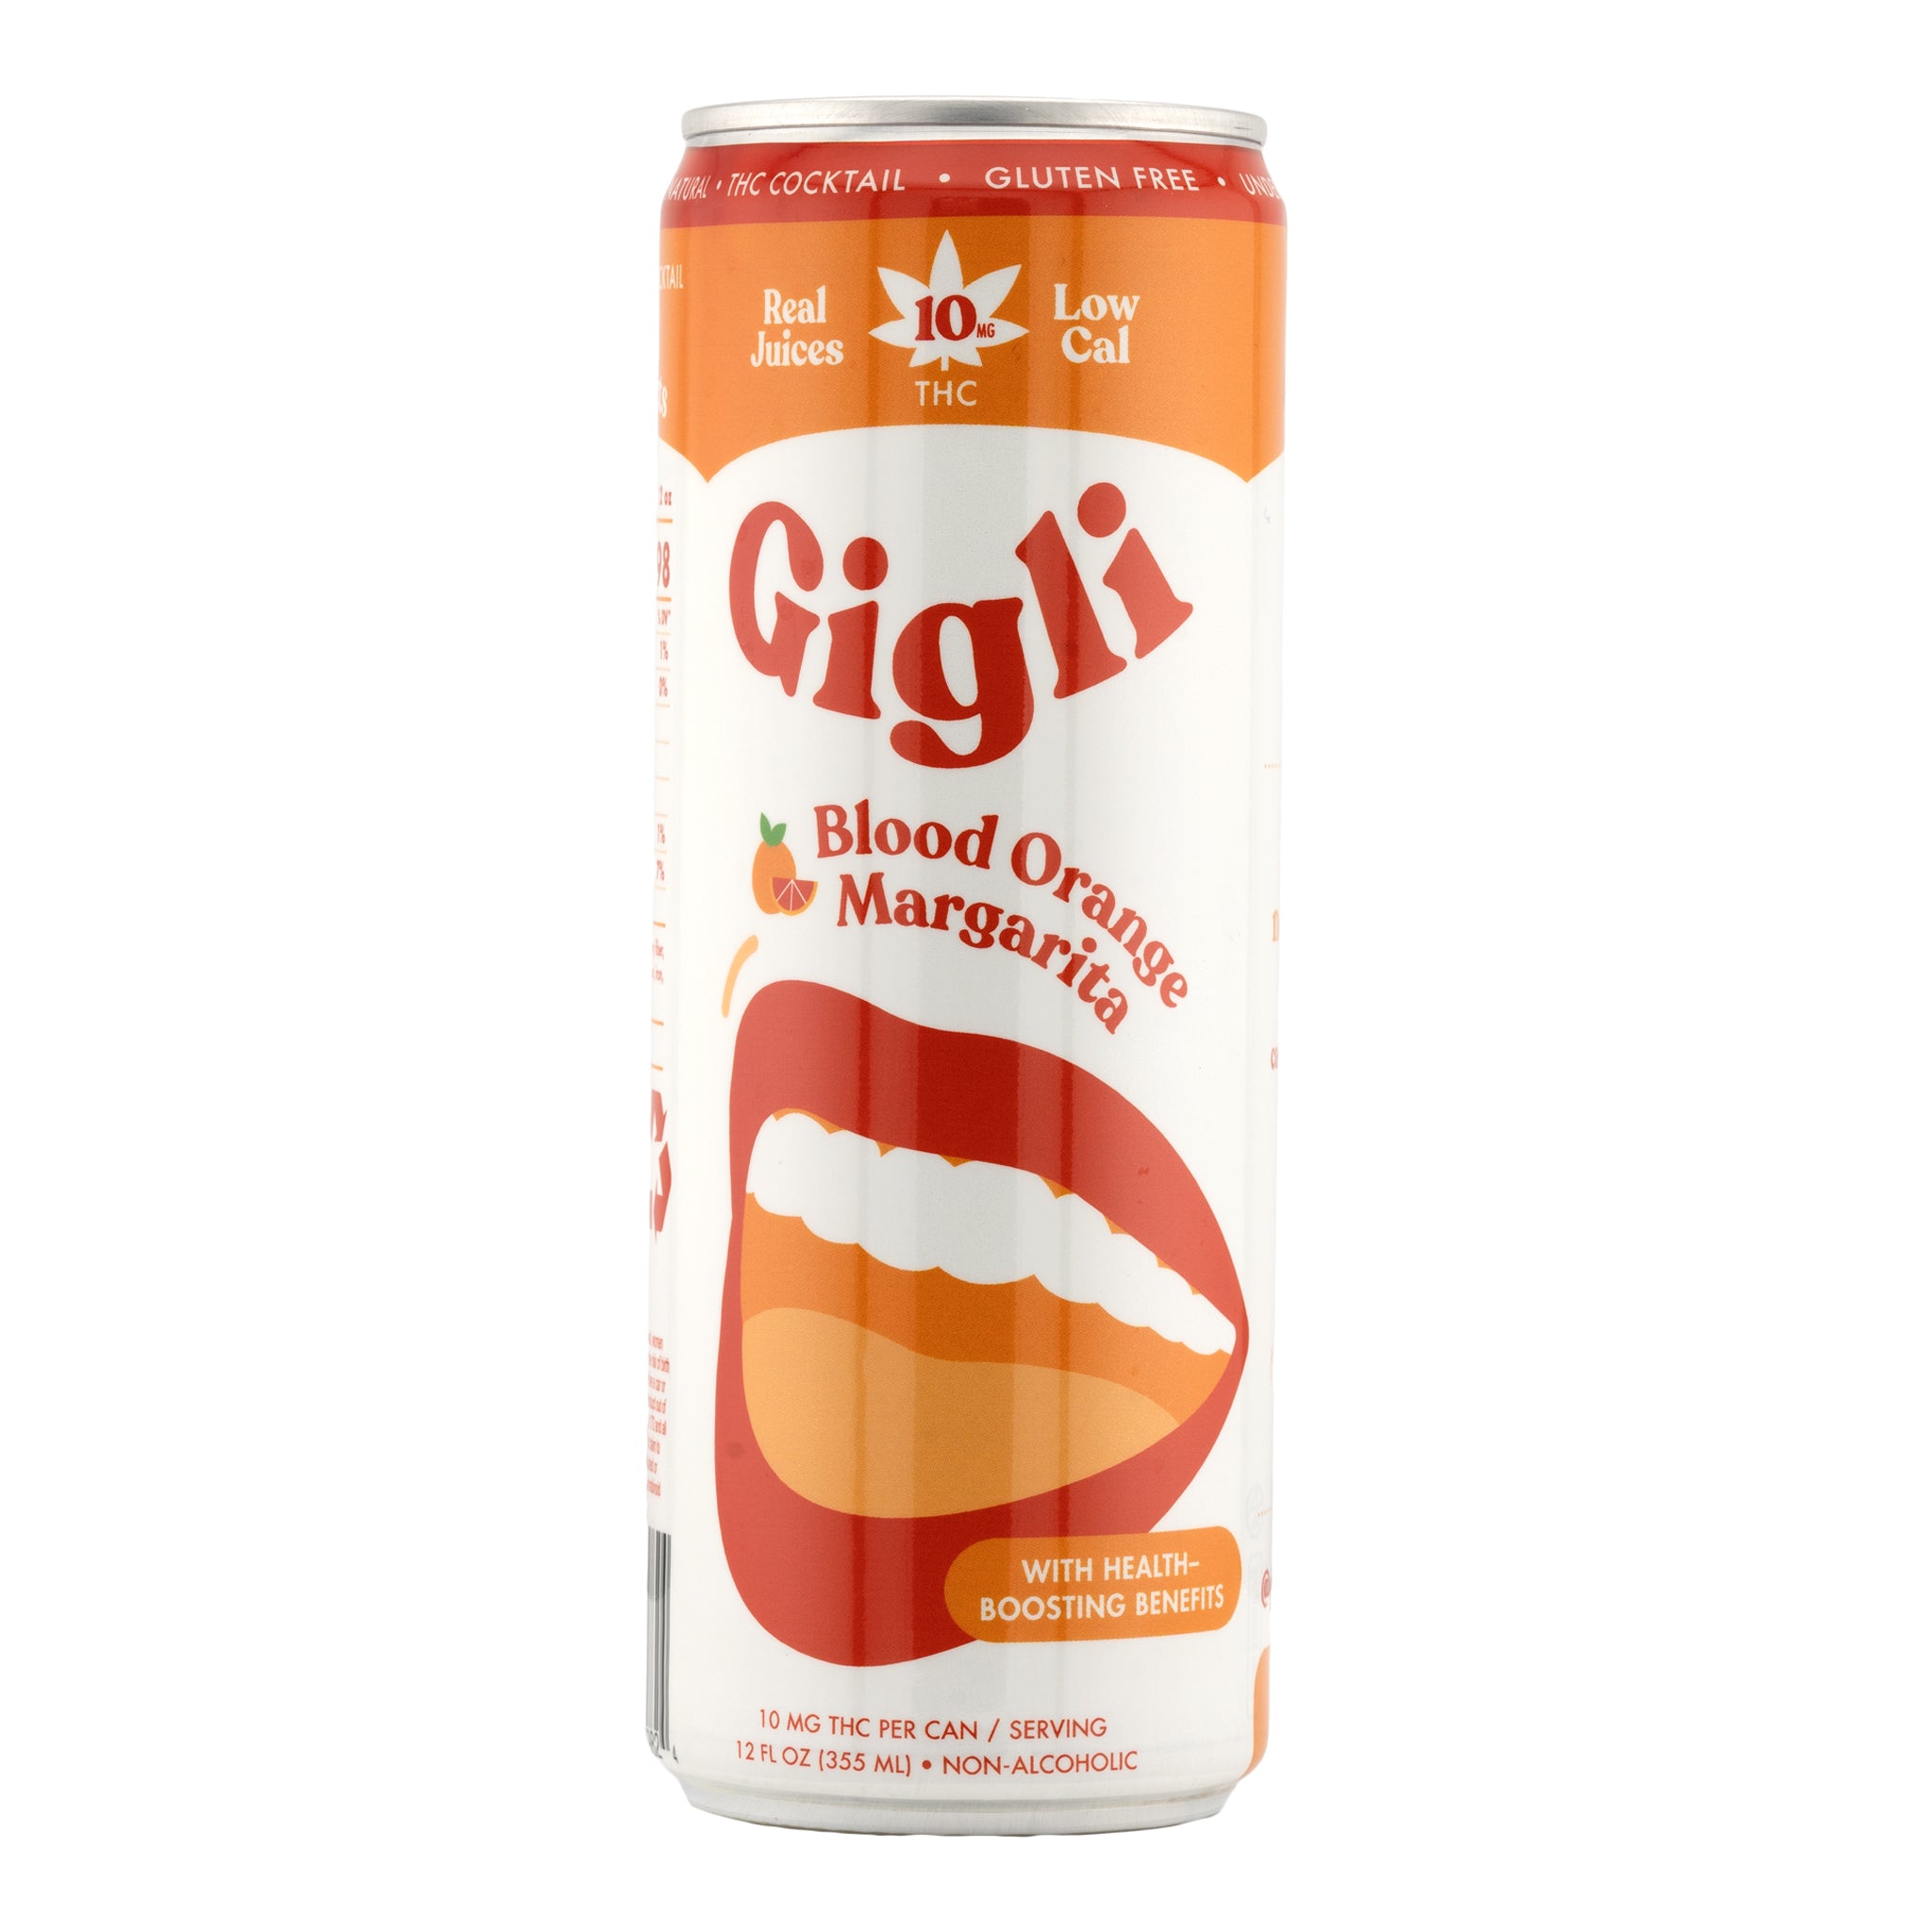 GIGLI THC Cocktails (10 mg)